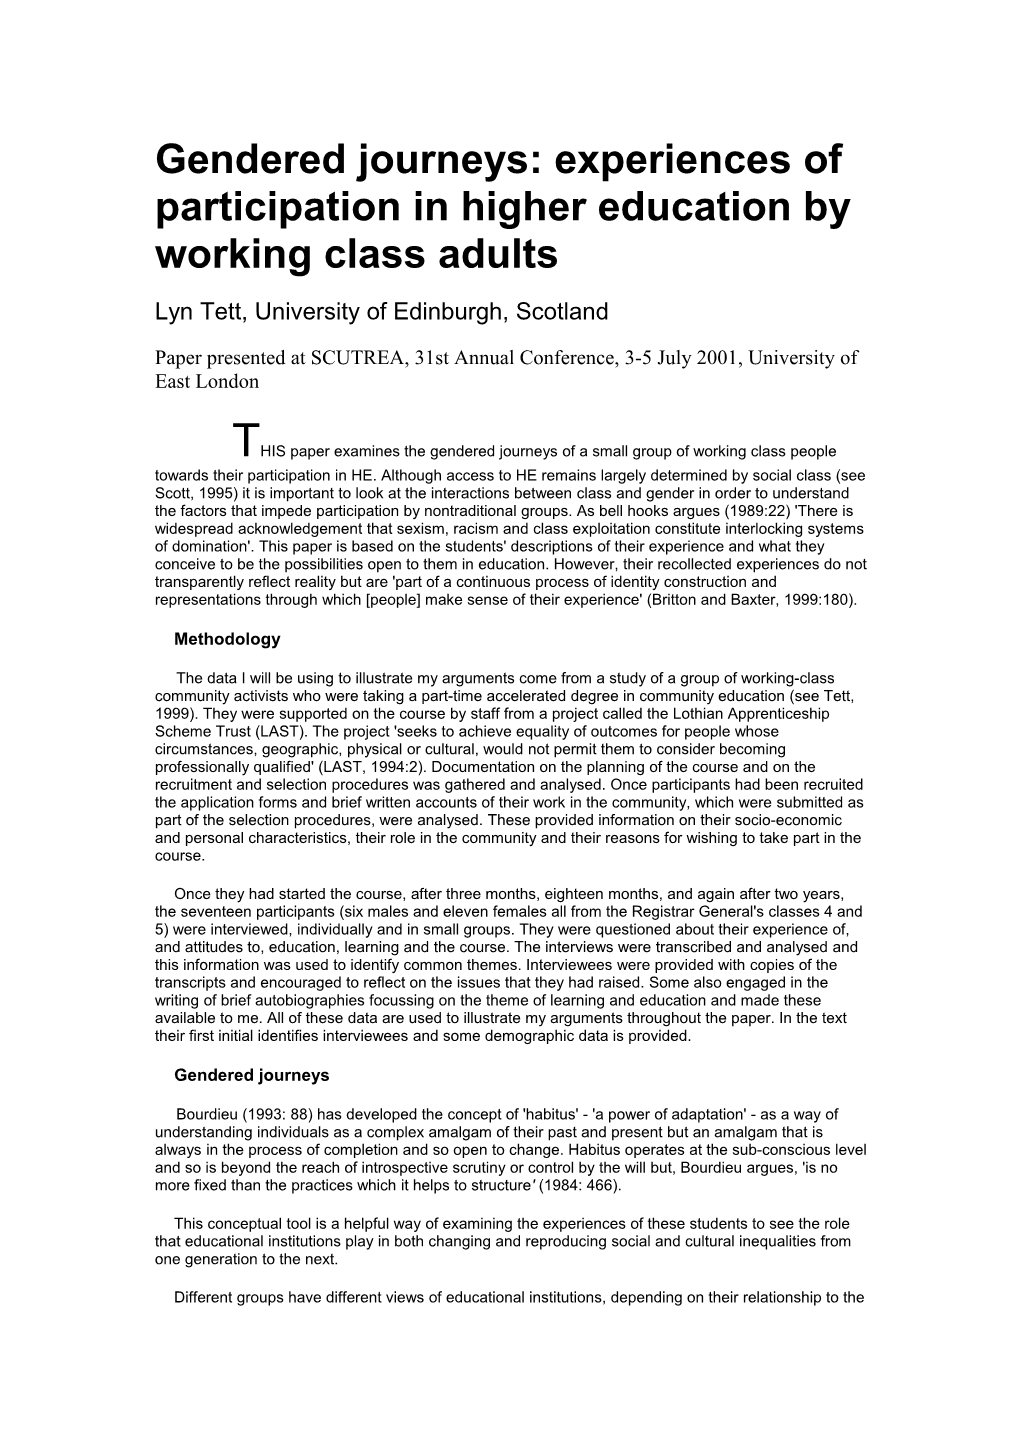 Gendered Journeys: Experiences of Participation in Higher Education by Working Class Adults